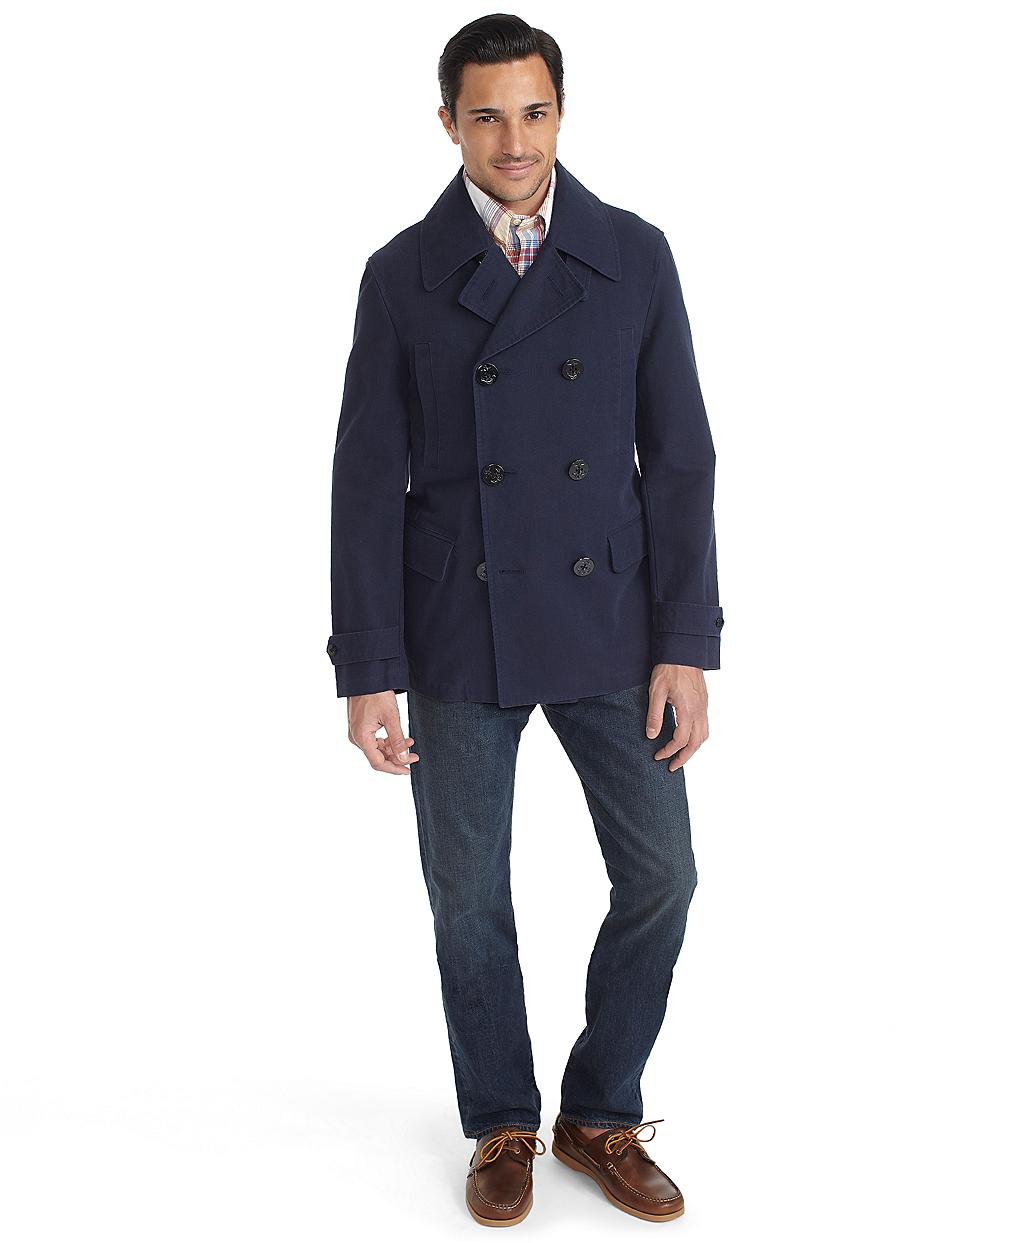 Lyst - Brooks Brothers Cotton Canvas Pea Coat in Blue for Men